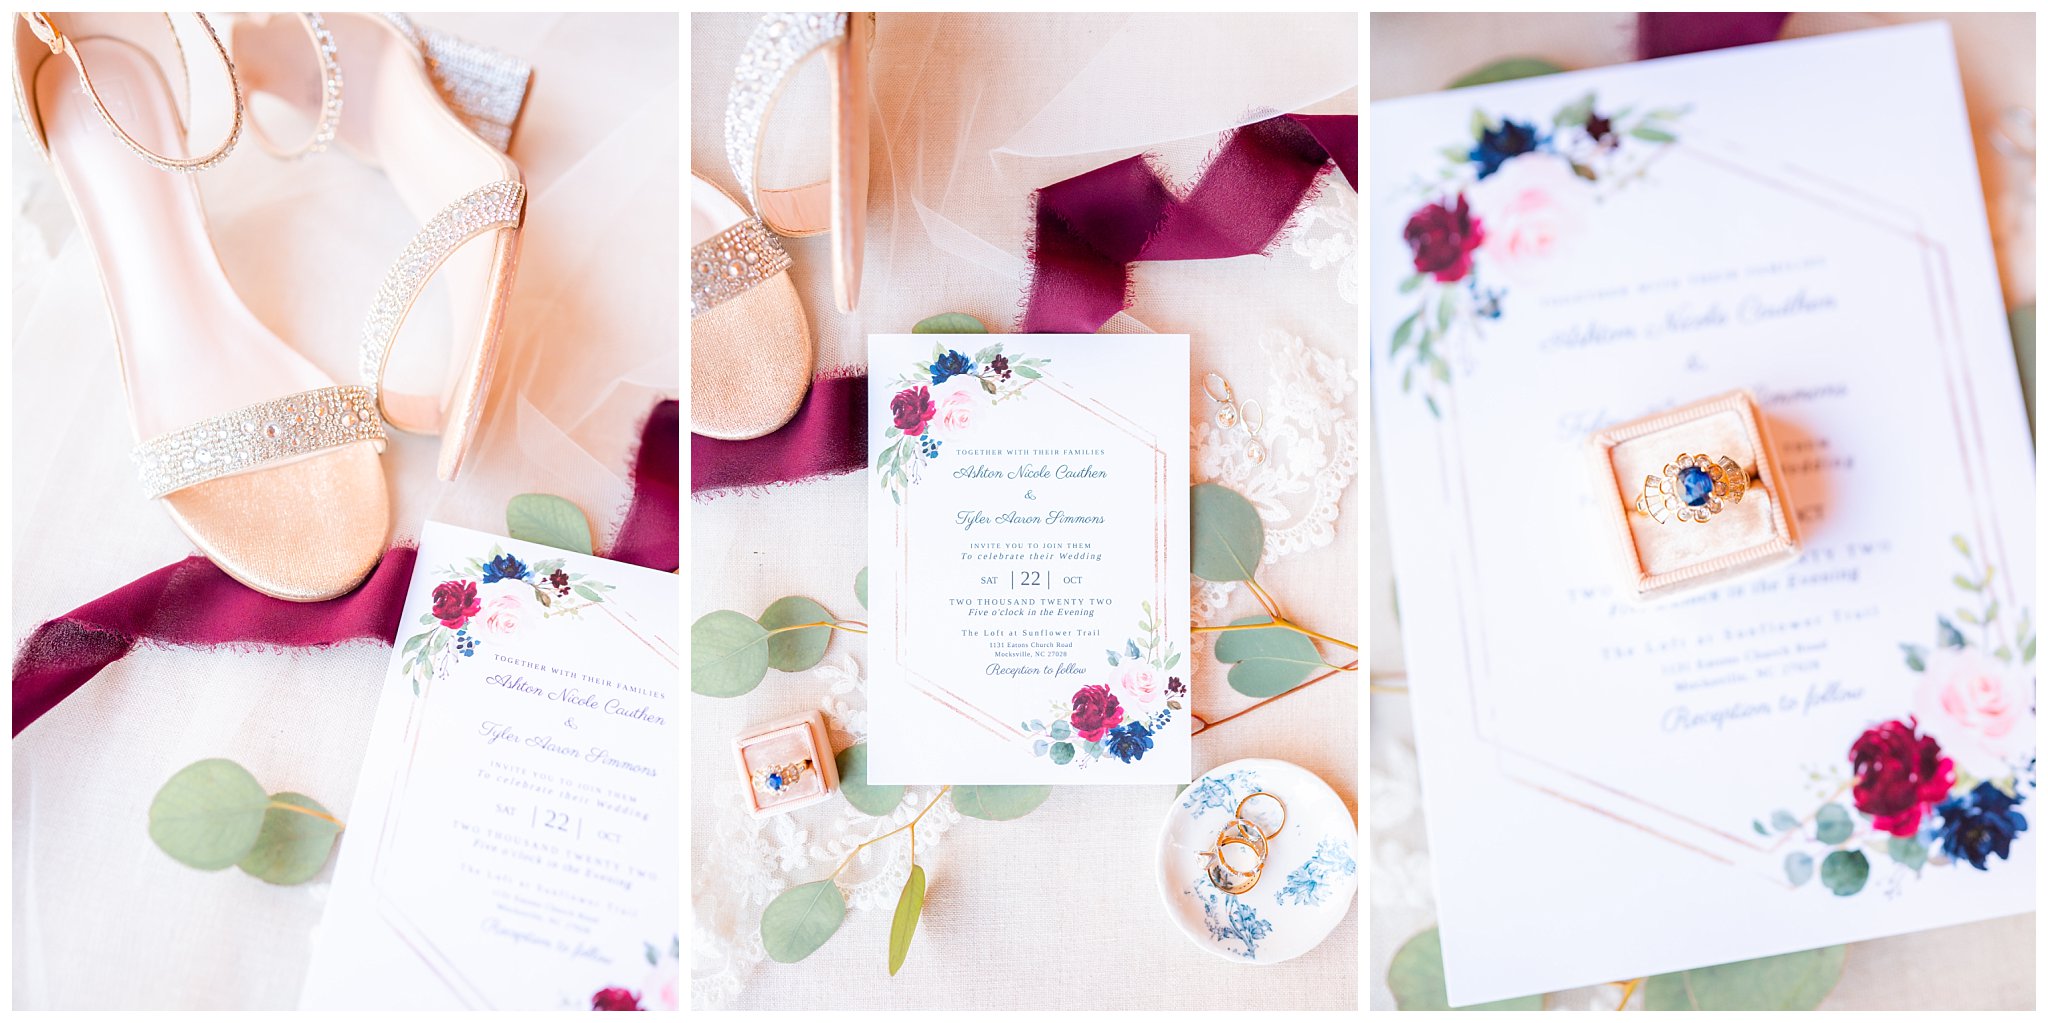 invitation details for red, white, and blue October wedding